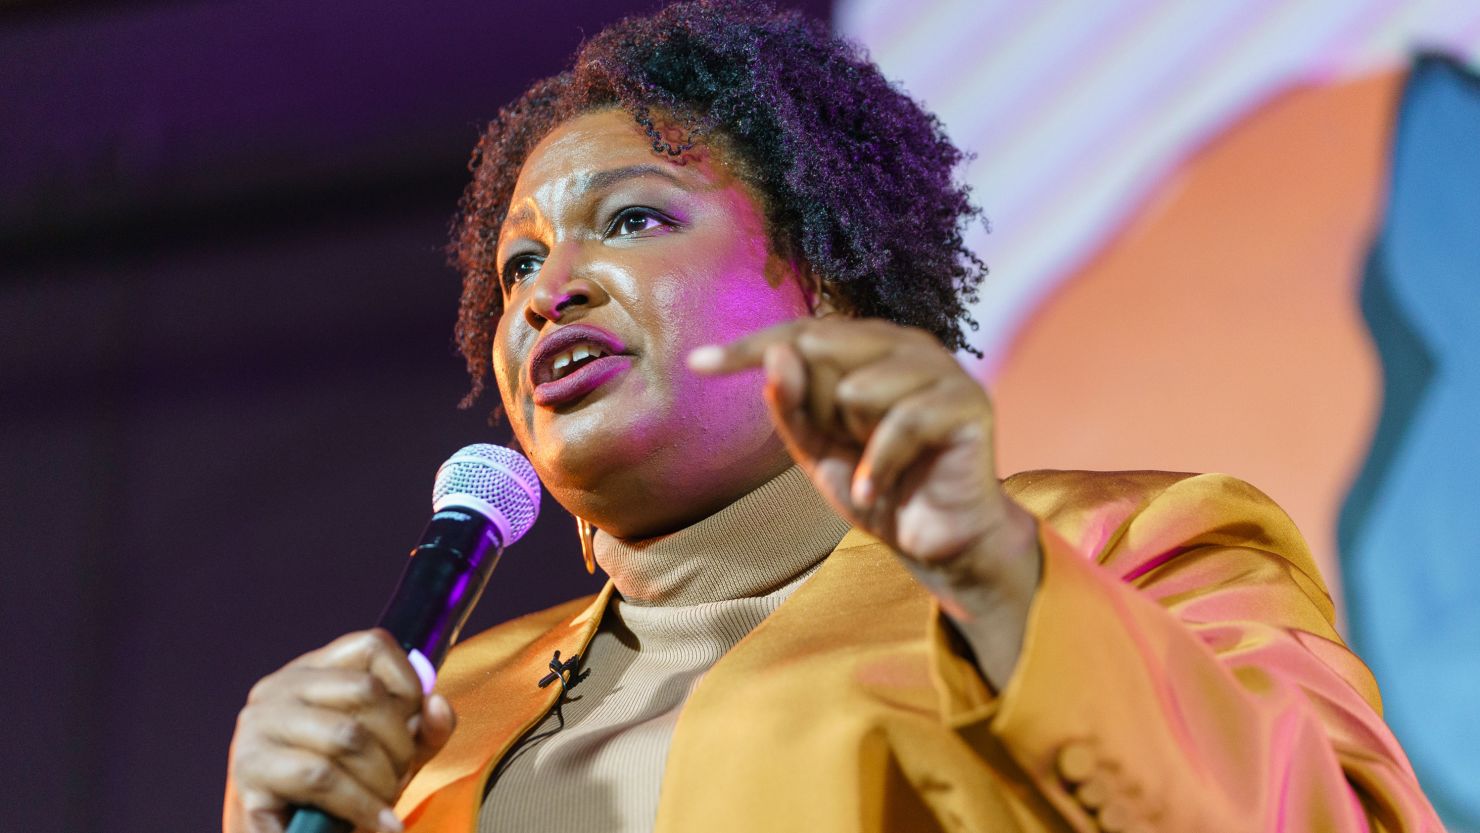 Georgia gubernatorial candidate Stacey Abrams speaks during a campaign event in Atlanta on September 9, 2022.